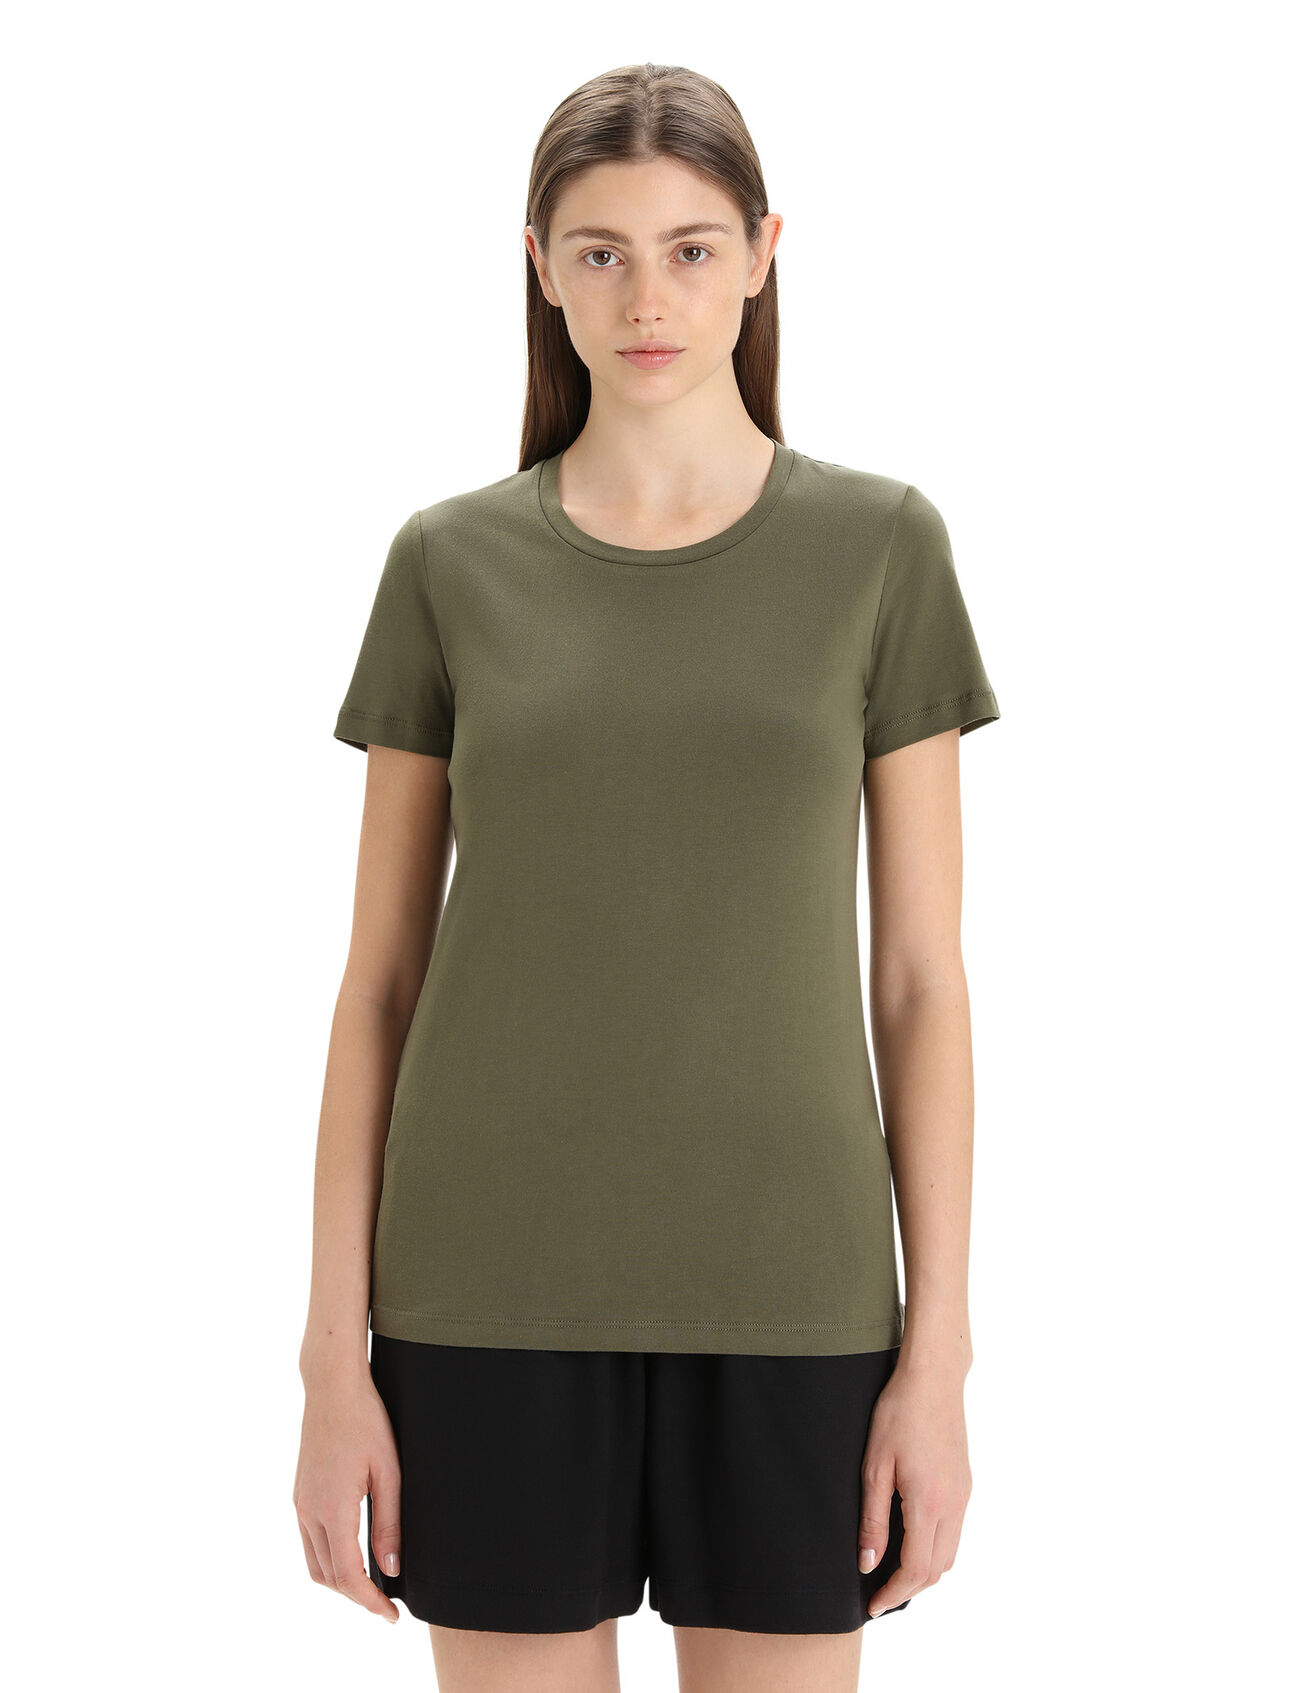 Womens Tencel™  Cotton Short Sleeve T-Shirt A clean and comfortable everyday tee with classic style, the TENCEL™ Cotton Short Sleeve Tee features a super-soft jersey fabric that blends organically grown cotton with TENCEL™ Lyocell. 